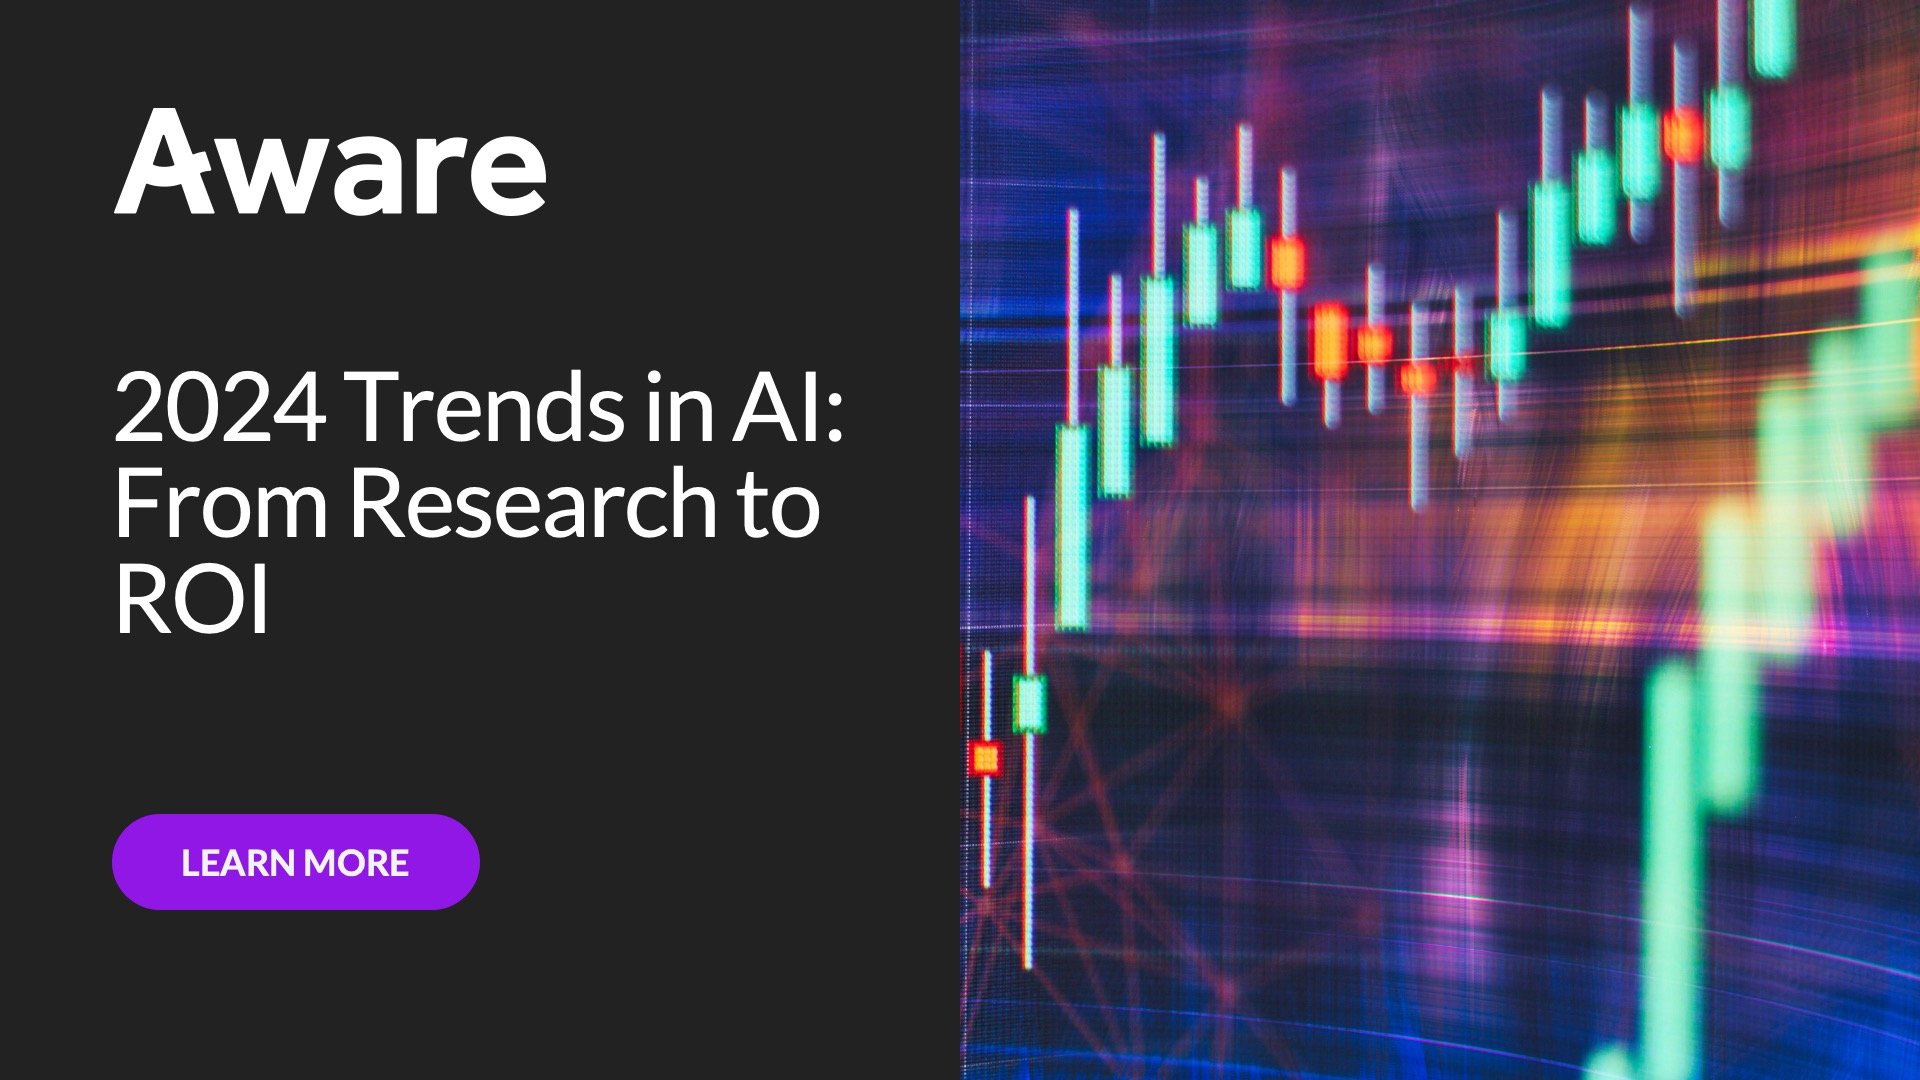 2024 Trends in AI: From Research to ROI